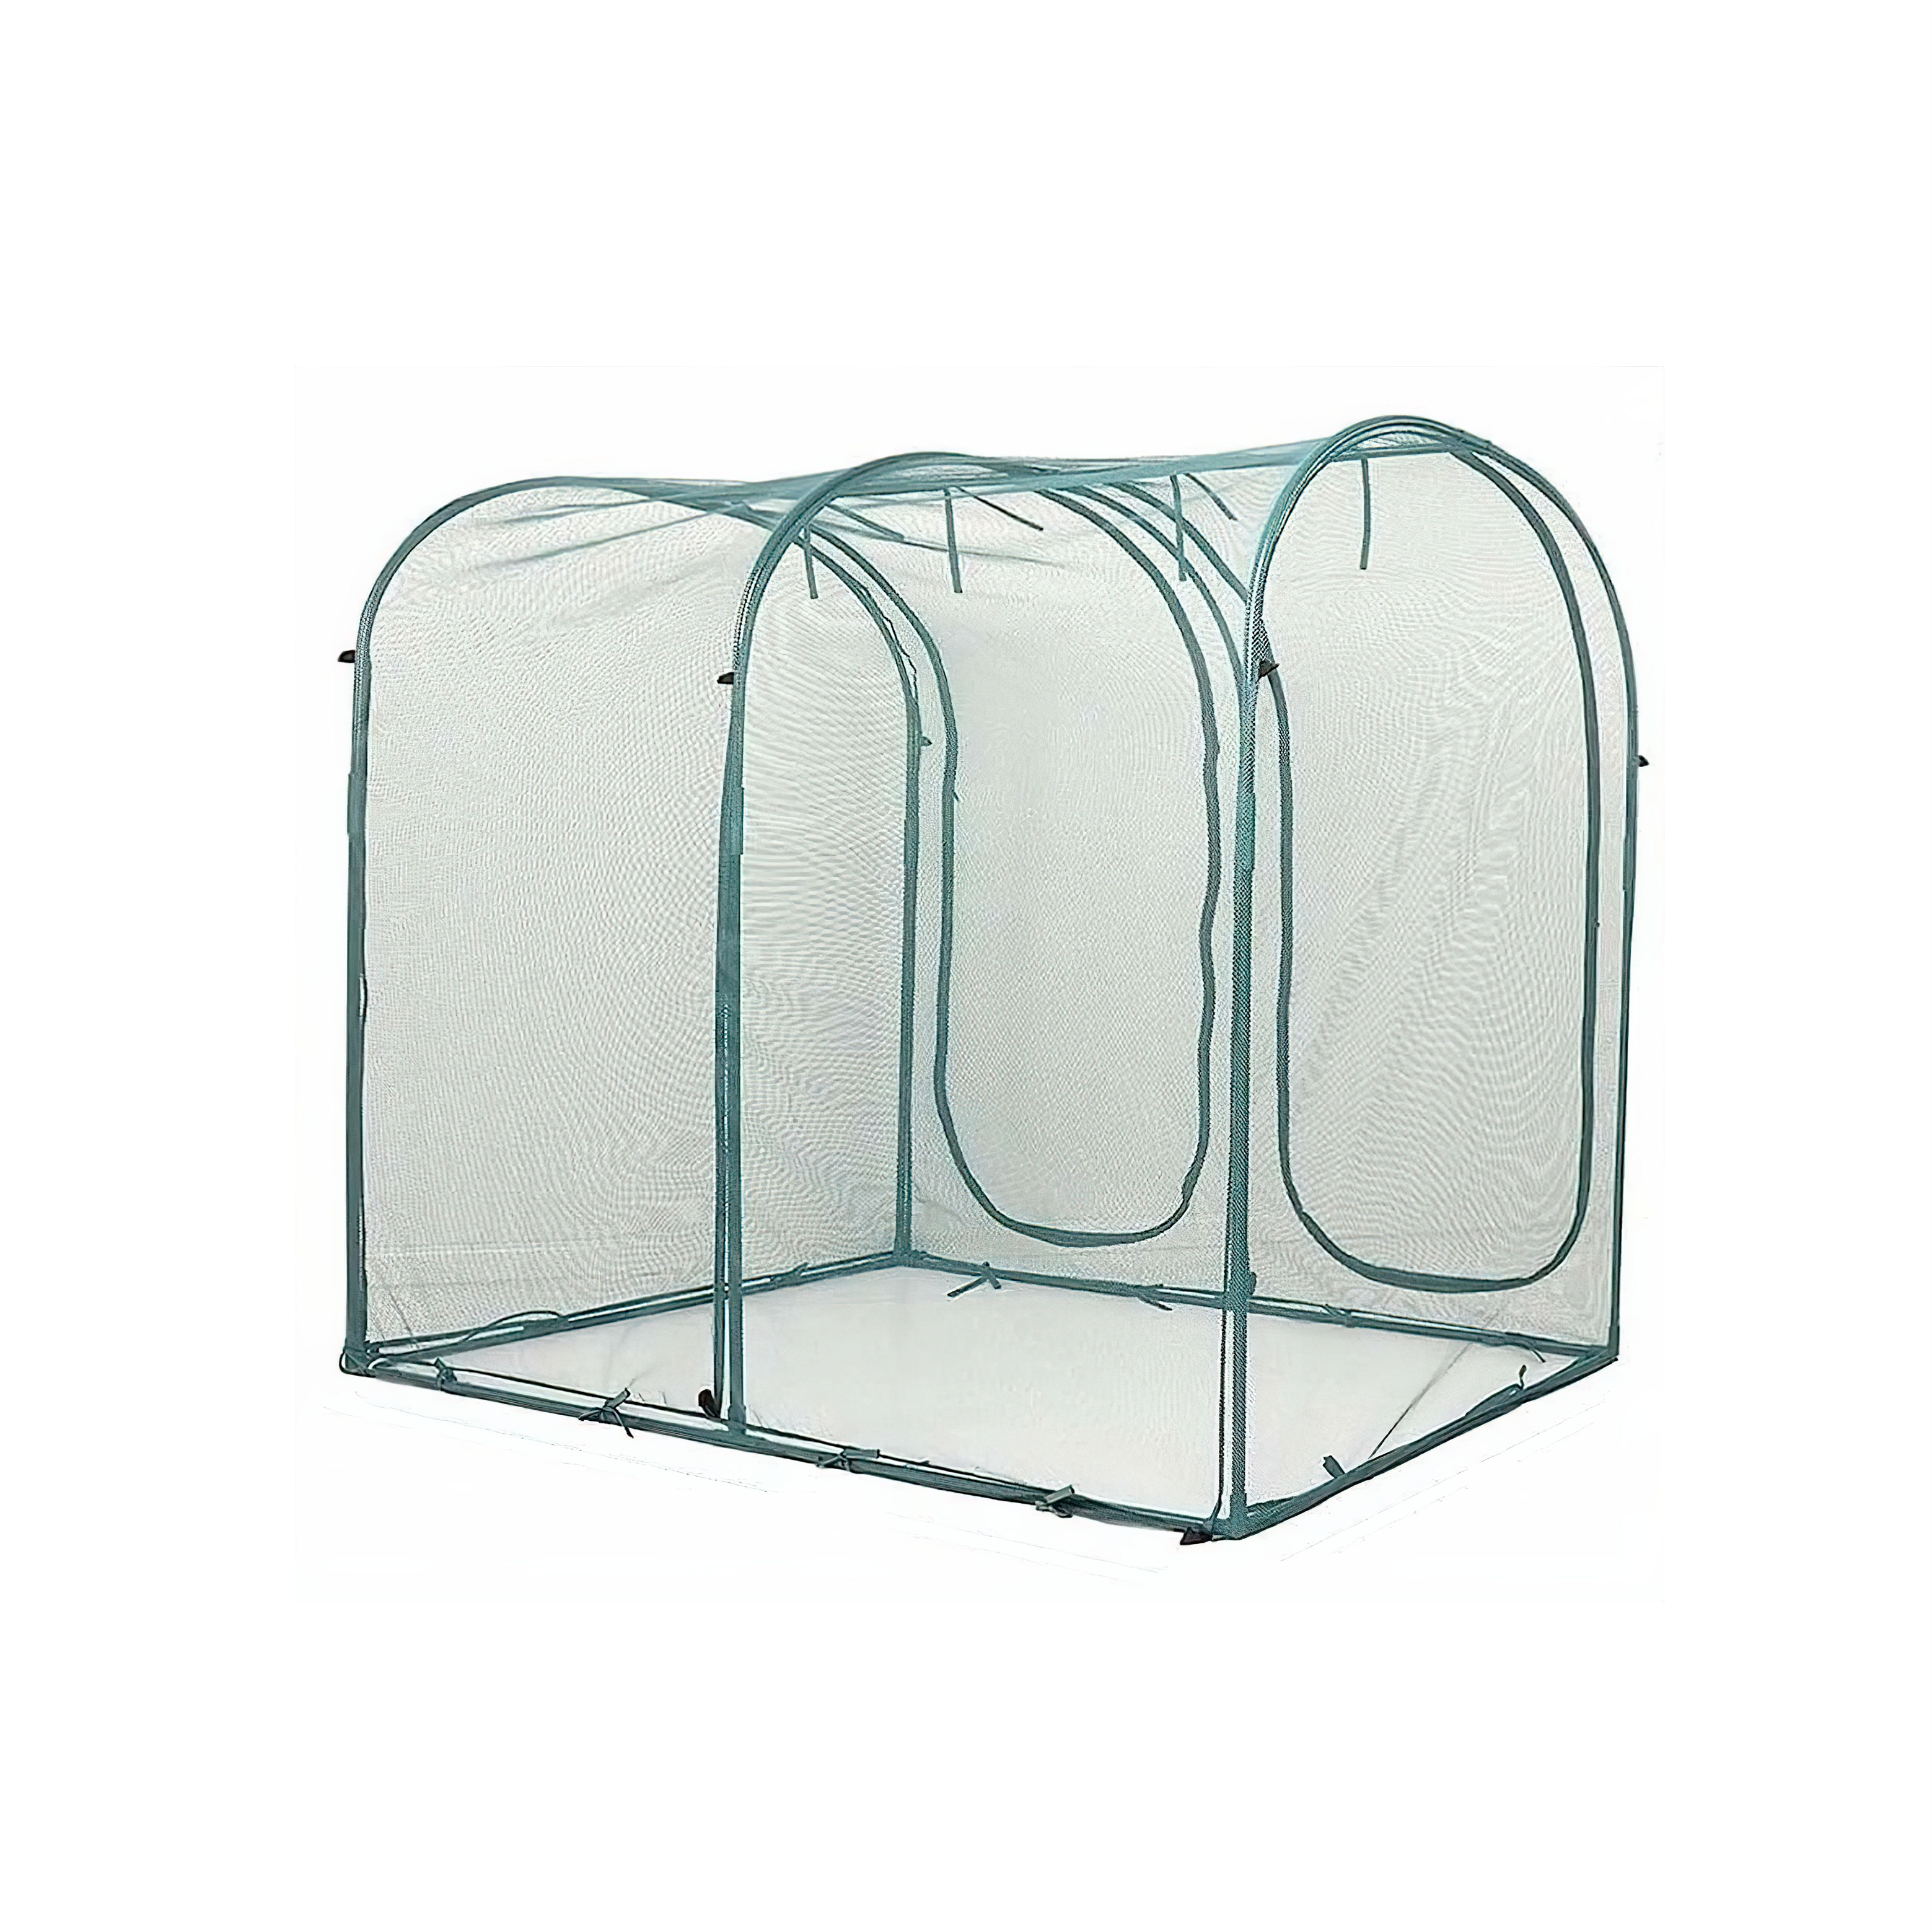 ARCH Crop Protection Cage – Compact